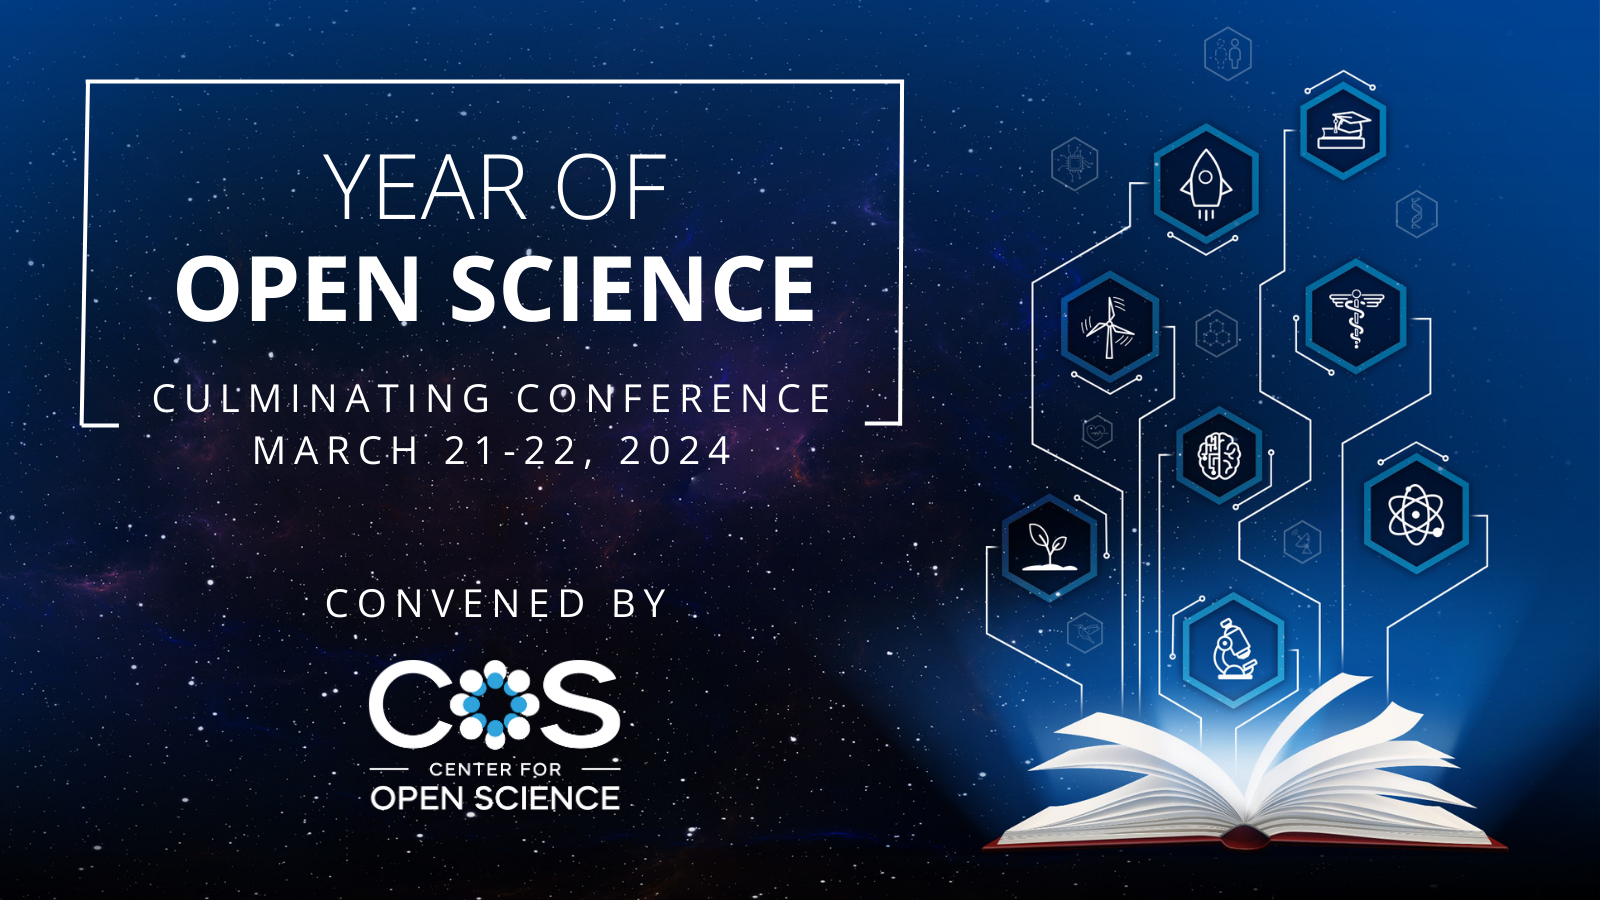 Year of Open Science Conference text treatment on blue background with image of book and scientific icons